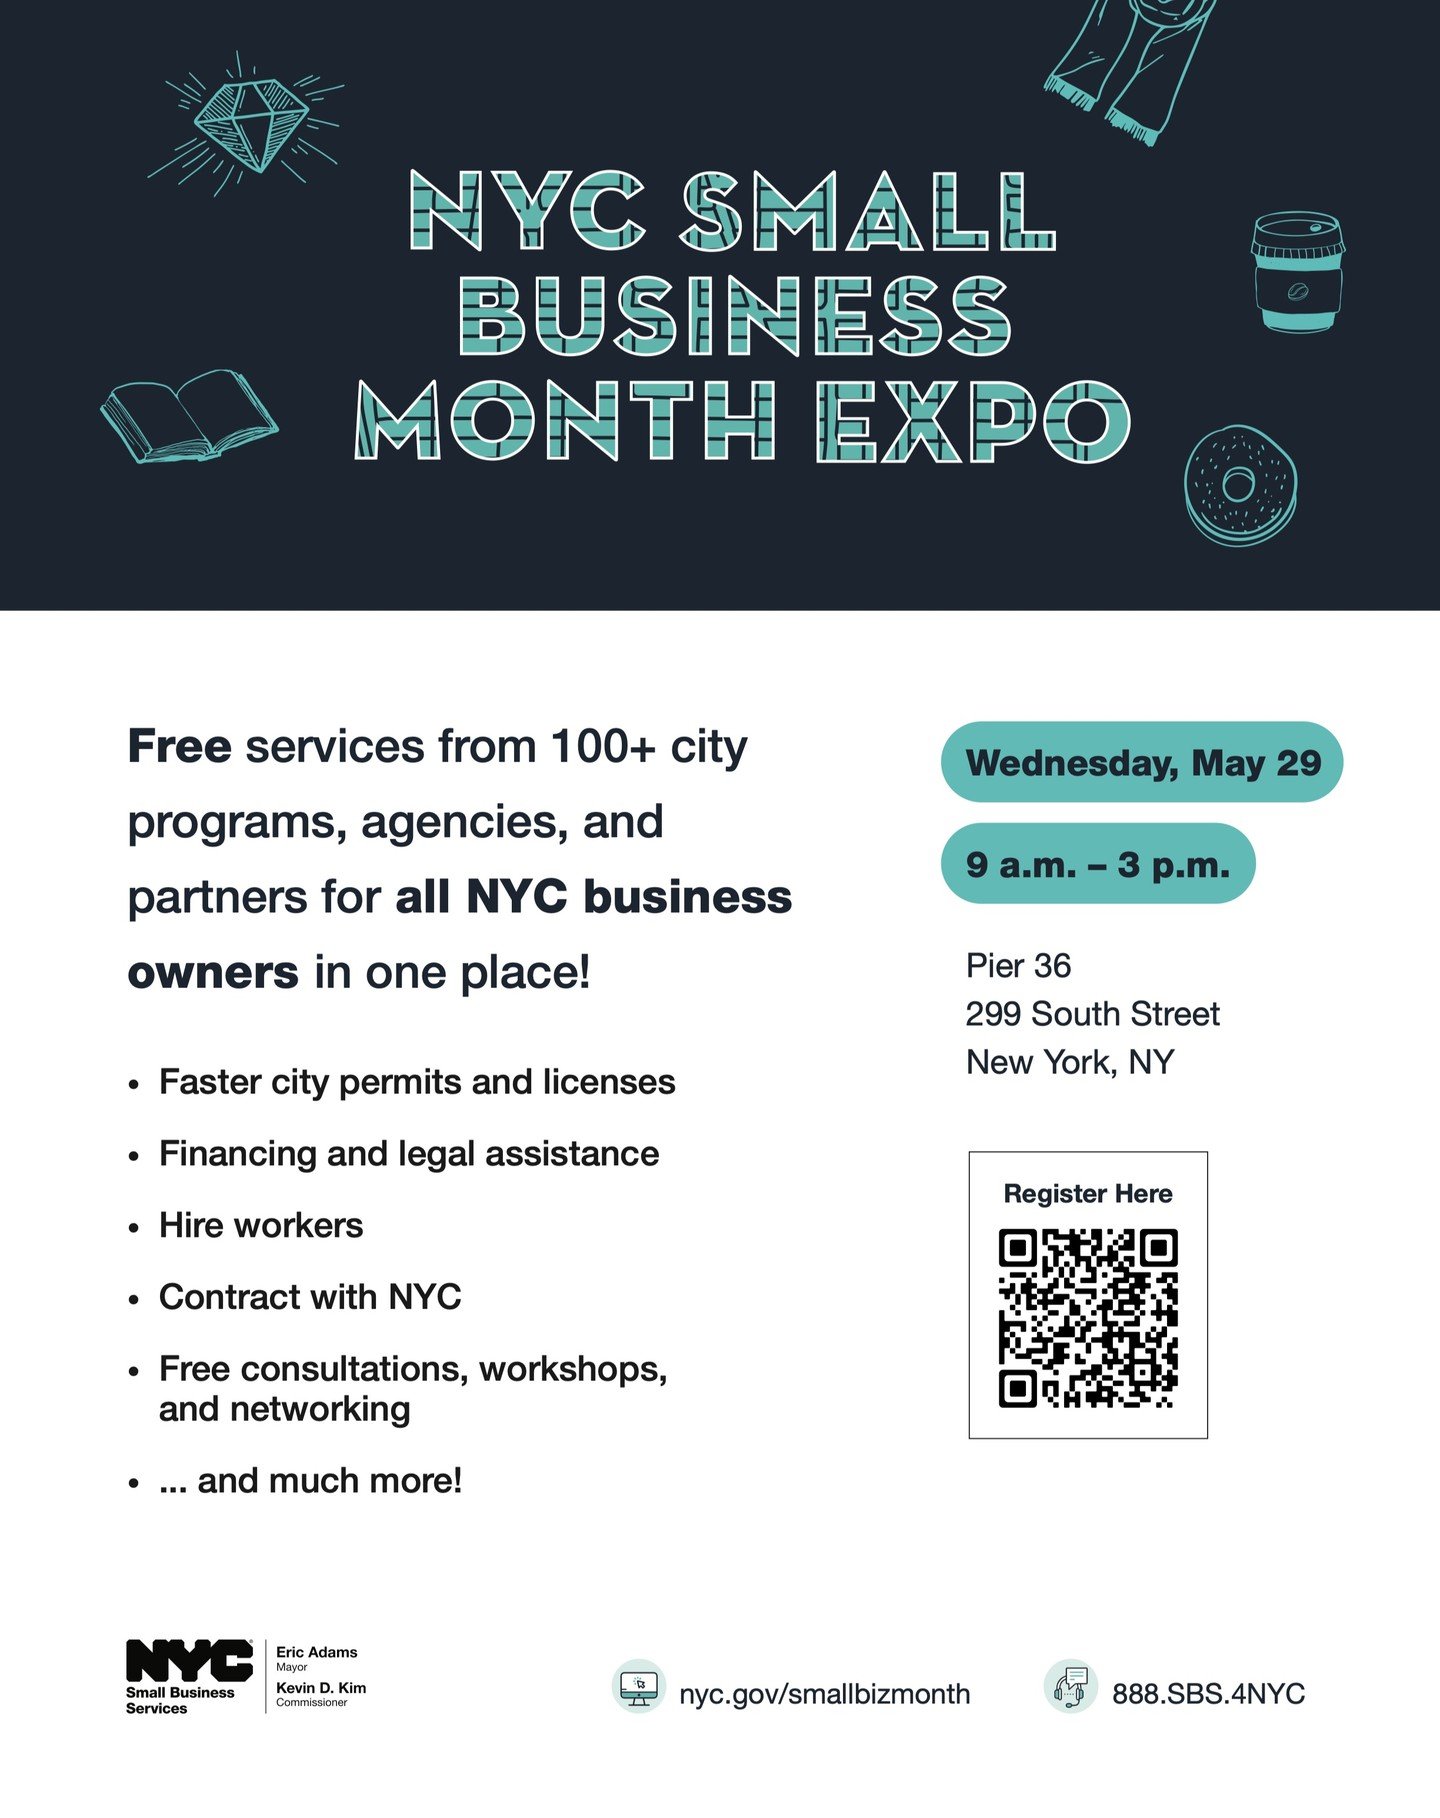 Happy Small Business Month! This Monday is SBS's second annual #nycbidday and we will be out tabling in front of our office @ 991 Amsterdam Ave to distribute information about the BID, our local businesses, and how to take advantage of the many resou